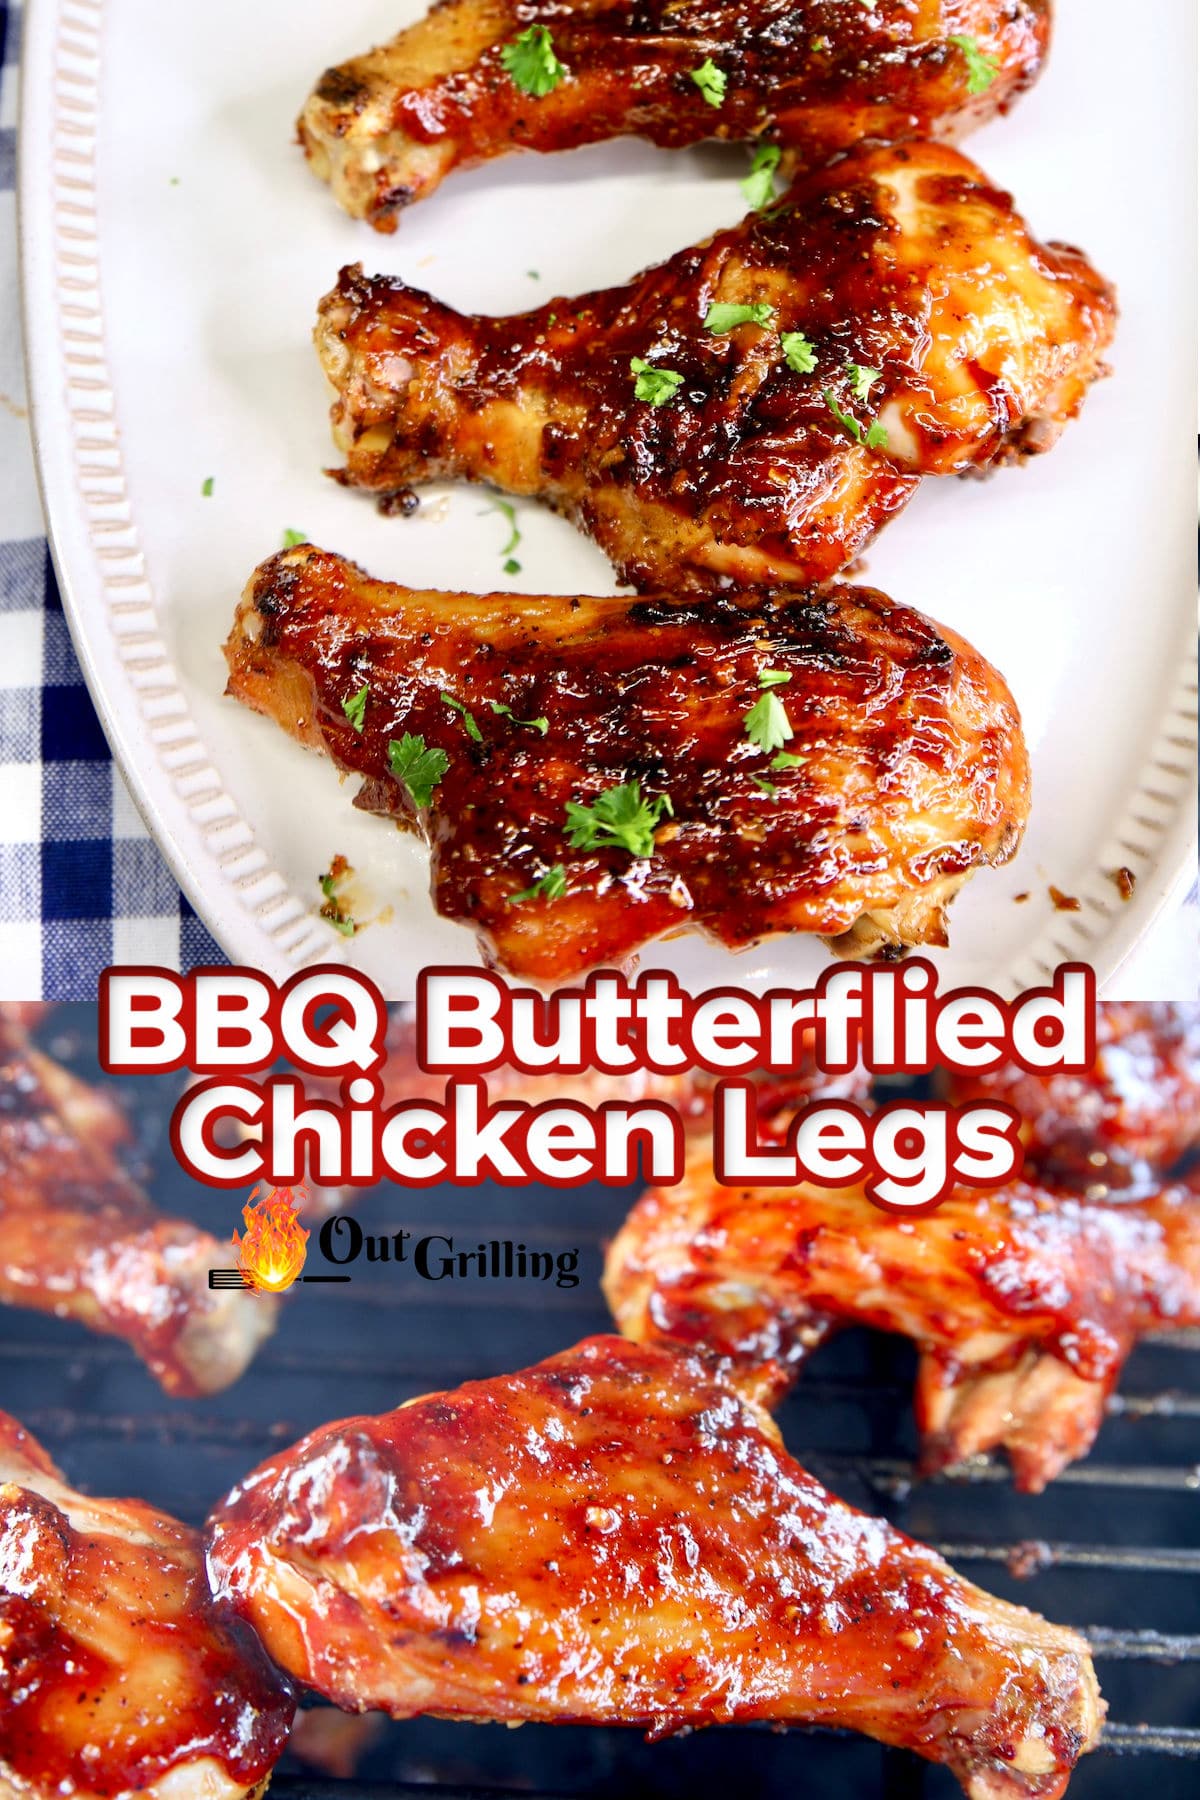 BBQ Butterflied Chicken Legs - Out Grilling